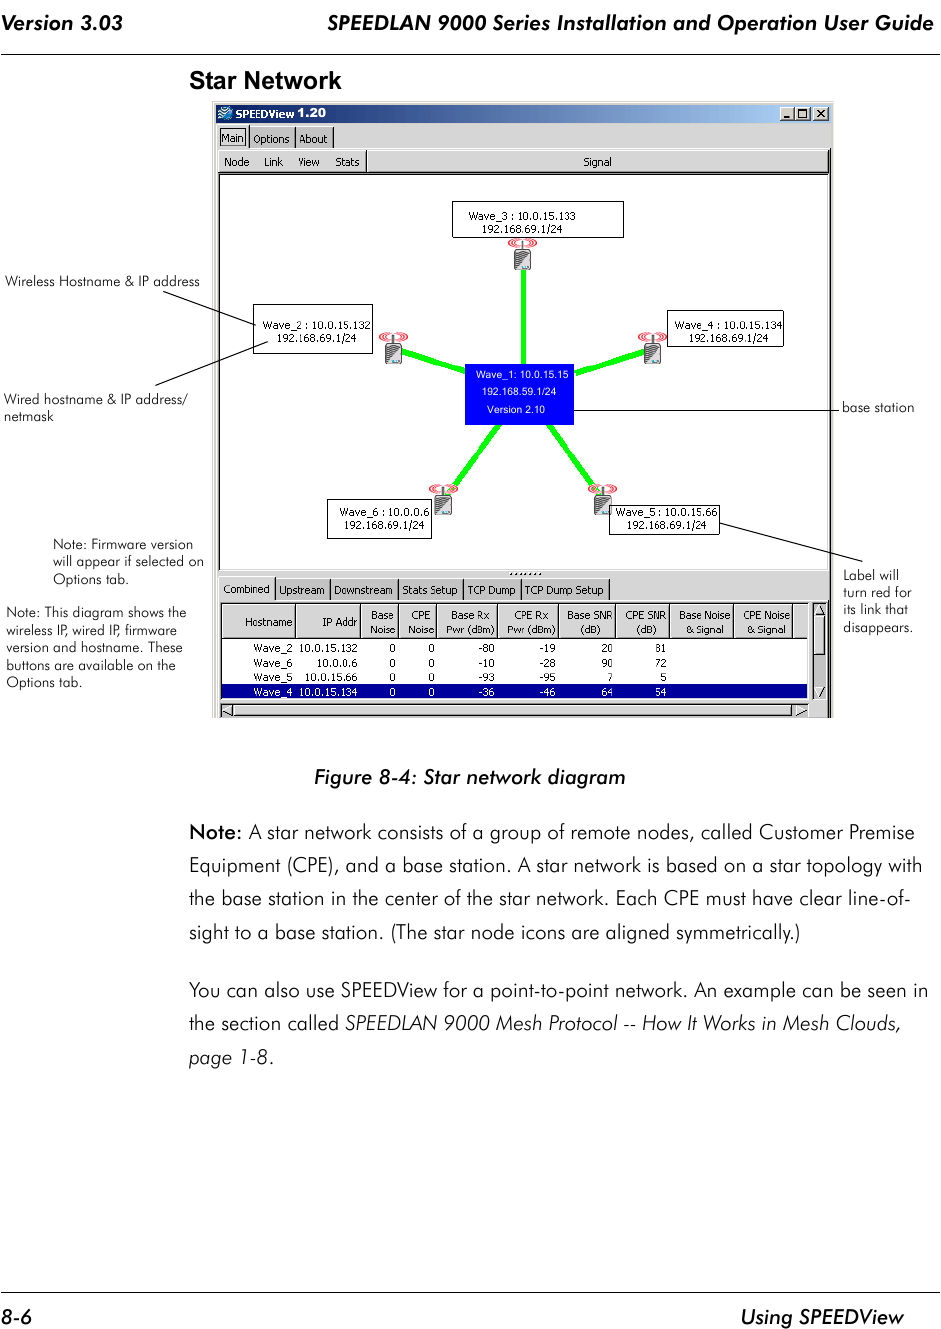 Version 3.03                                 SPEEDLAN 9000 Series Installation and Operation User Guide 8-6 Using SPEEDViewStar Network Figure 8-4: Star network diagramNote: A star network consists of a group of remote nodes, called Customer Premise Equipment (CPE), and a base station. A star network is based on a star topology with the base station in the center of the star network. Each CPE must have clear line-of-sight to a base station. (The star node icons are aligned symmetrically.)You can also use SPEEDView for a point-to-point network. An example can be seen in the section called SPEEDLAN 9000 Mesh Protocol -- How It Works in Mesh Clouds, page 1-8. Wireless Hostname &amp; IP addressWired hostname &amp; IP address/netmask  Note: Firmware versionWave_1: 10.0.15.15  192.168.59.1/24    Version 2.10Note: This diagram shows thewireless IP, wired IP, firmwareversion and hostname. Thesebuttons are available on theOptions tab.1.20will appear if selected on Options tab. base stationLabel willturn red for its link thatdisappears.